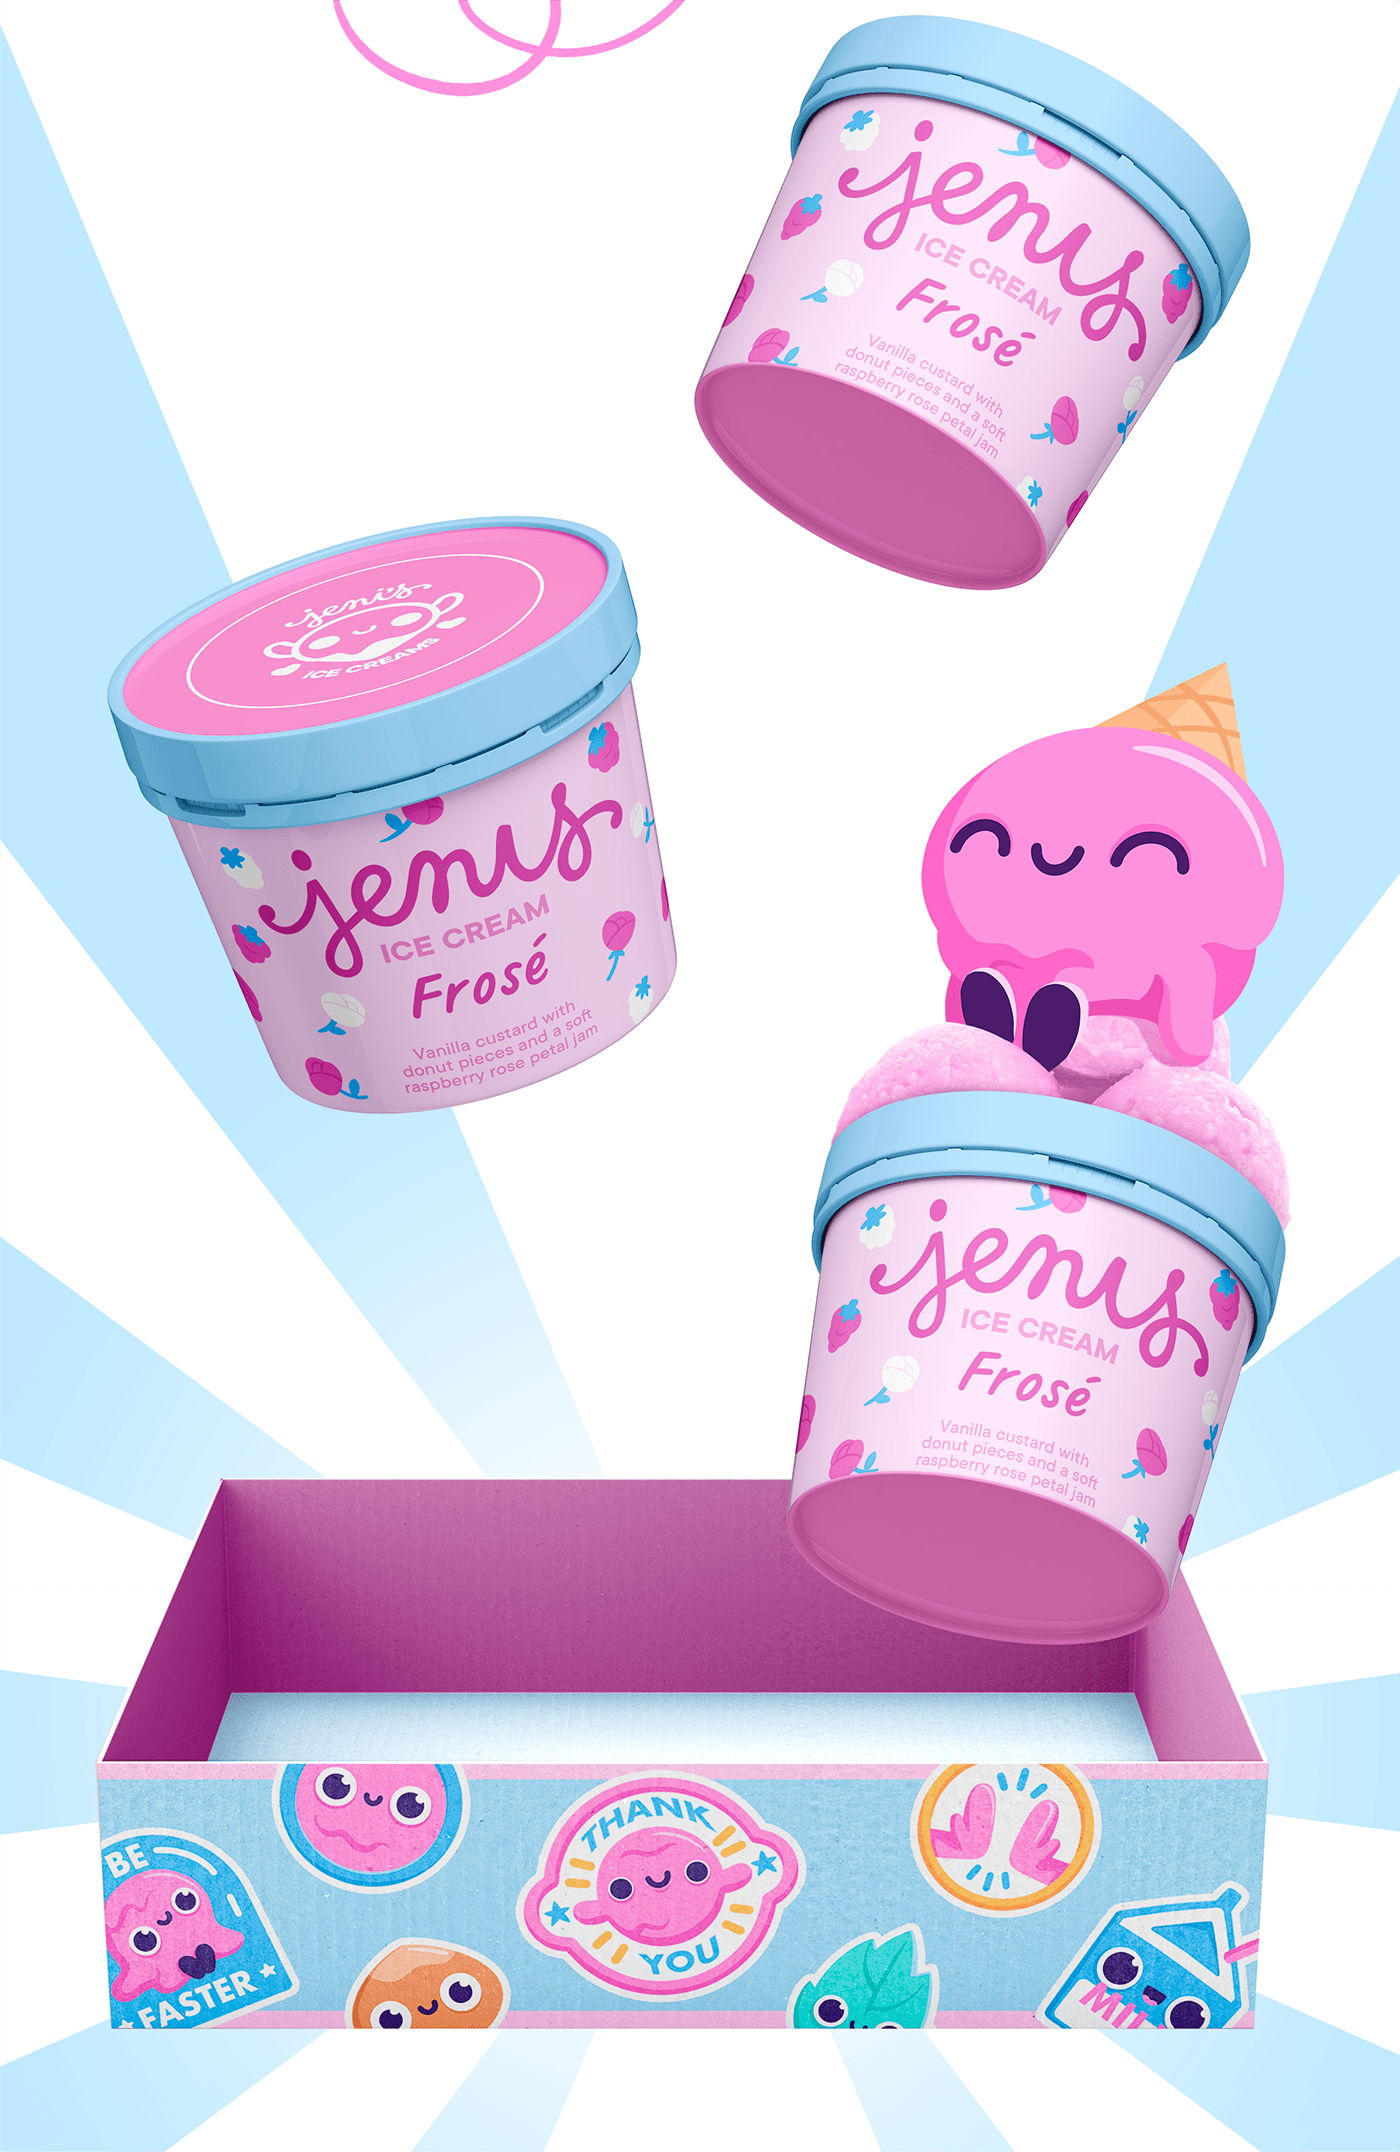 brand character brand identity graphic design  ice cream packaging design product design  brand illustration branding  illustrations Character design 